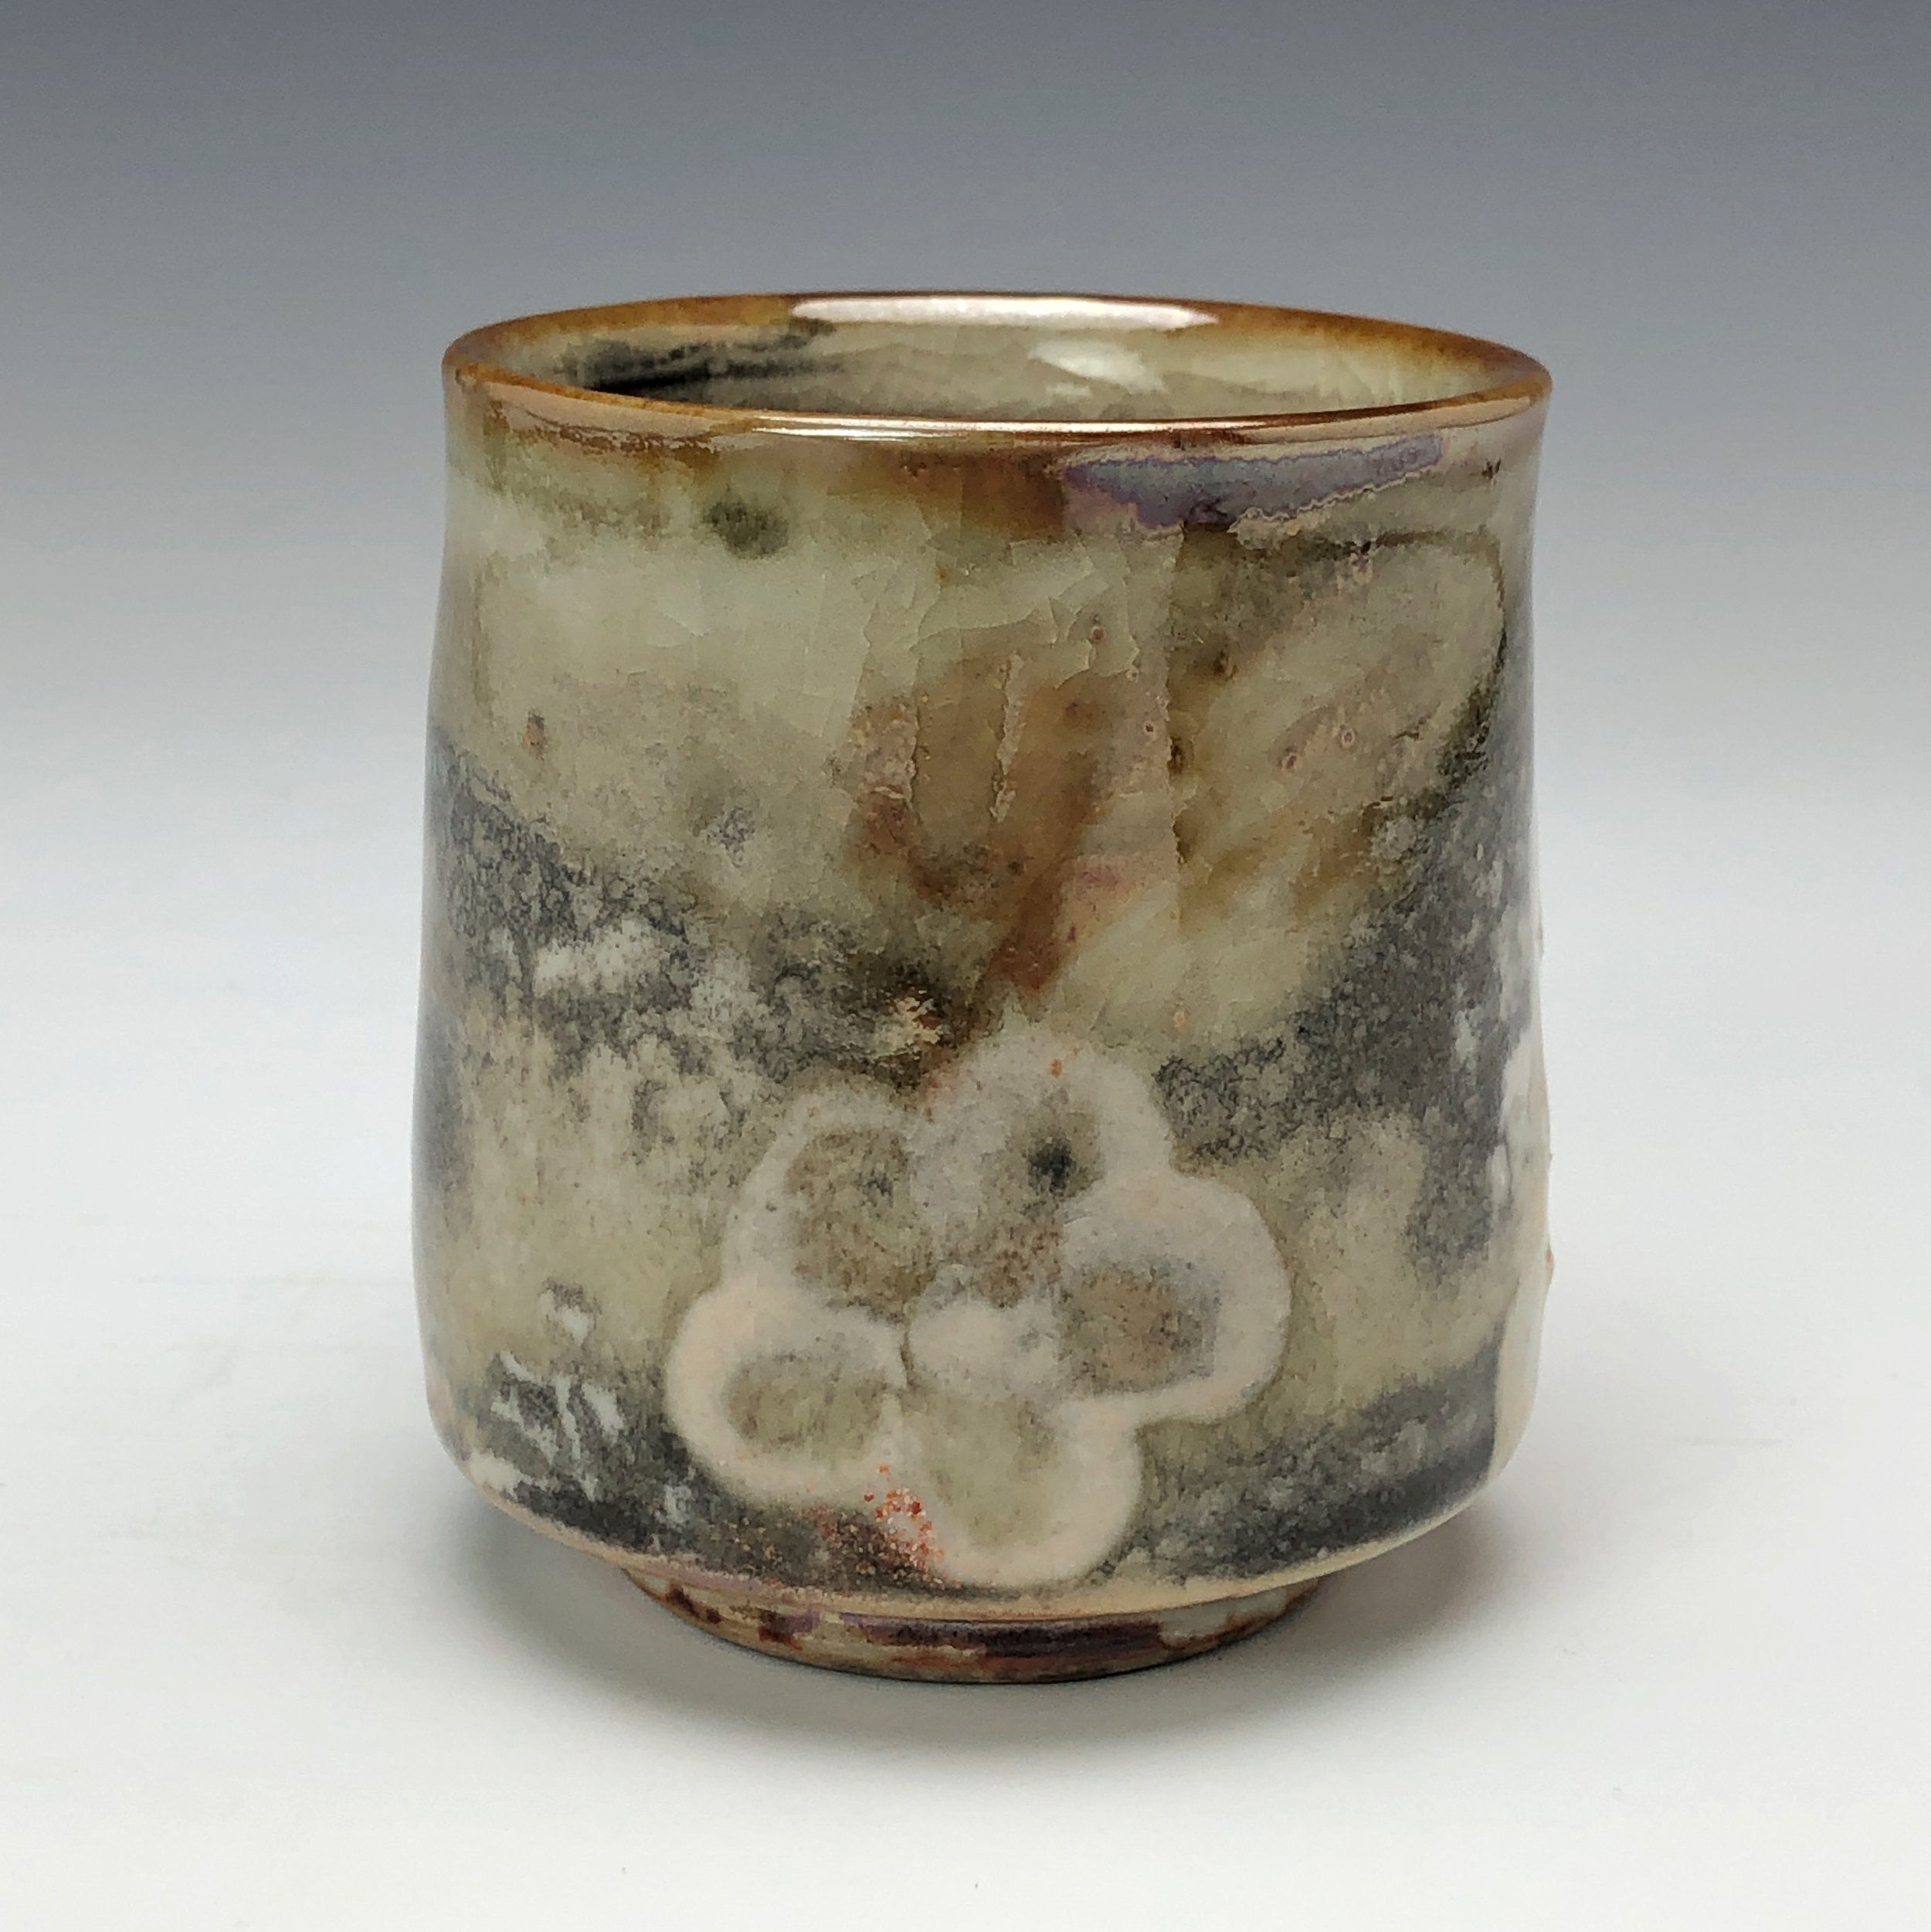  Bruce Gholson, Bulldog Pottery, Seagrove, North Carolina   Yunomi 5  - Casual drinking cup made from porcelain with Iron Luster Fish. Ceramic cup also has swipes of yellow and blue. A textural shino is also glazed onto the some areas of the cup’s su